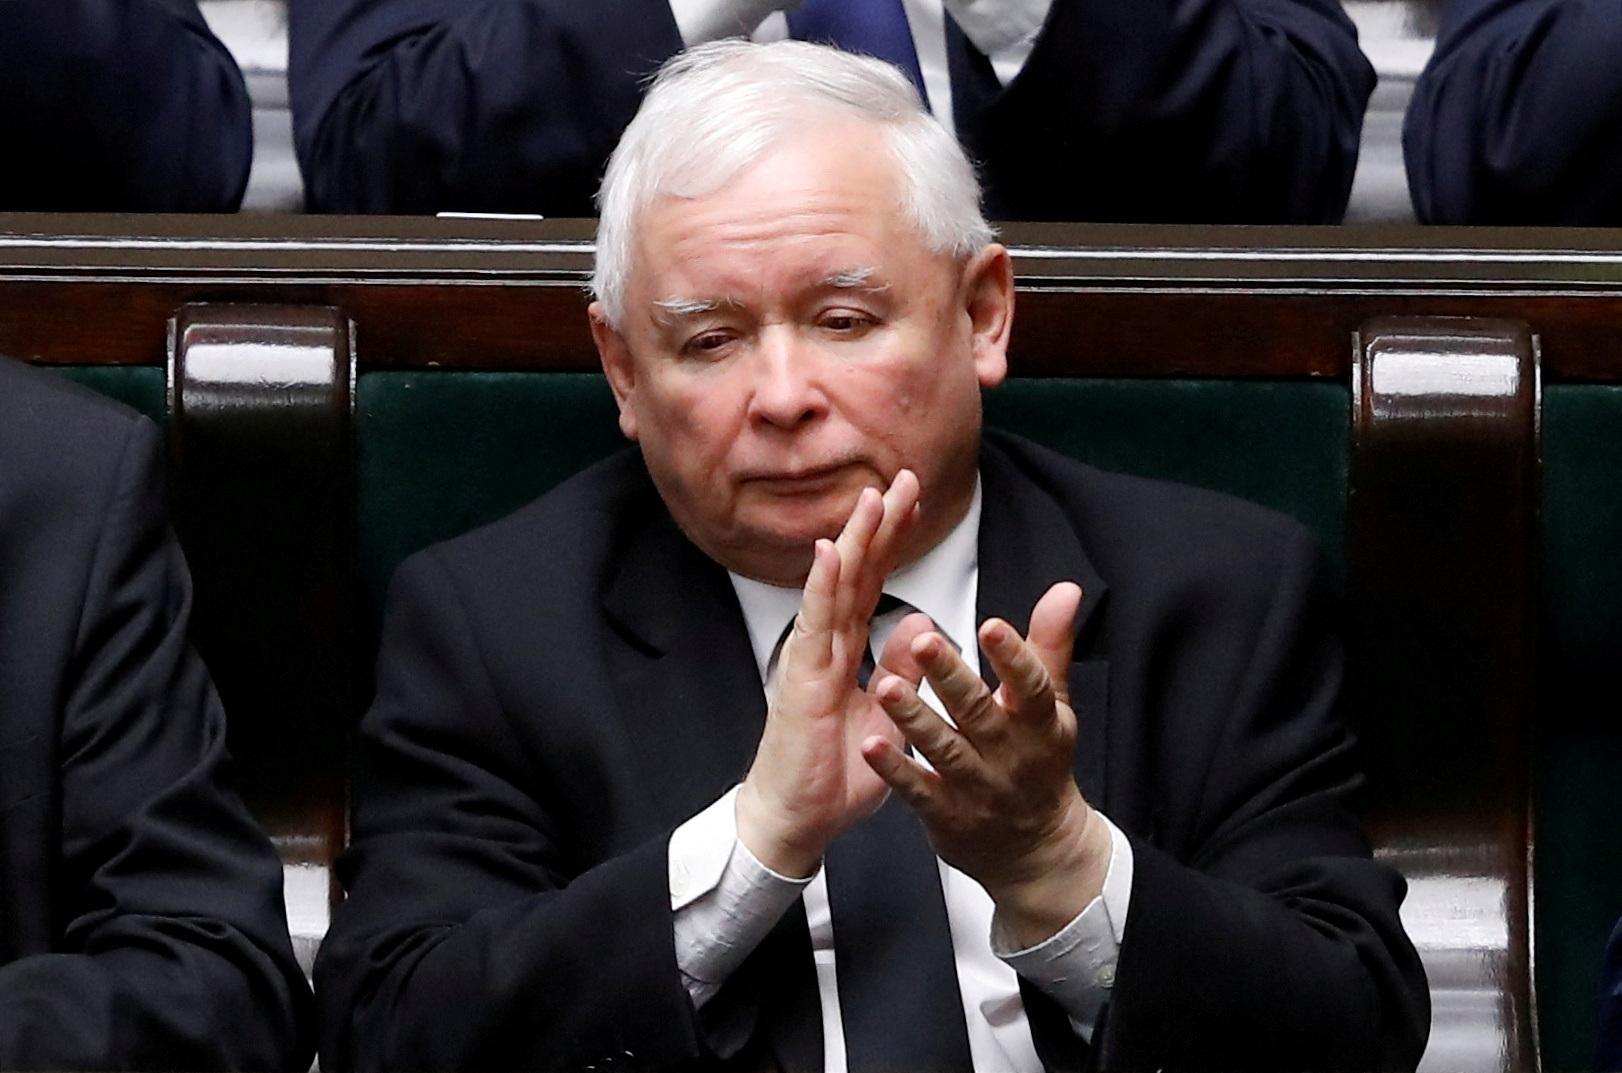 Law and Justice (PiS) leader Jaroslaw Kaczynski applauds during first sitting of Poland's lower house of parliament in Warsaw, Poland November 12, 2019.